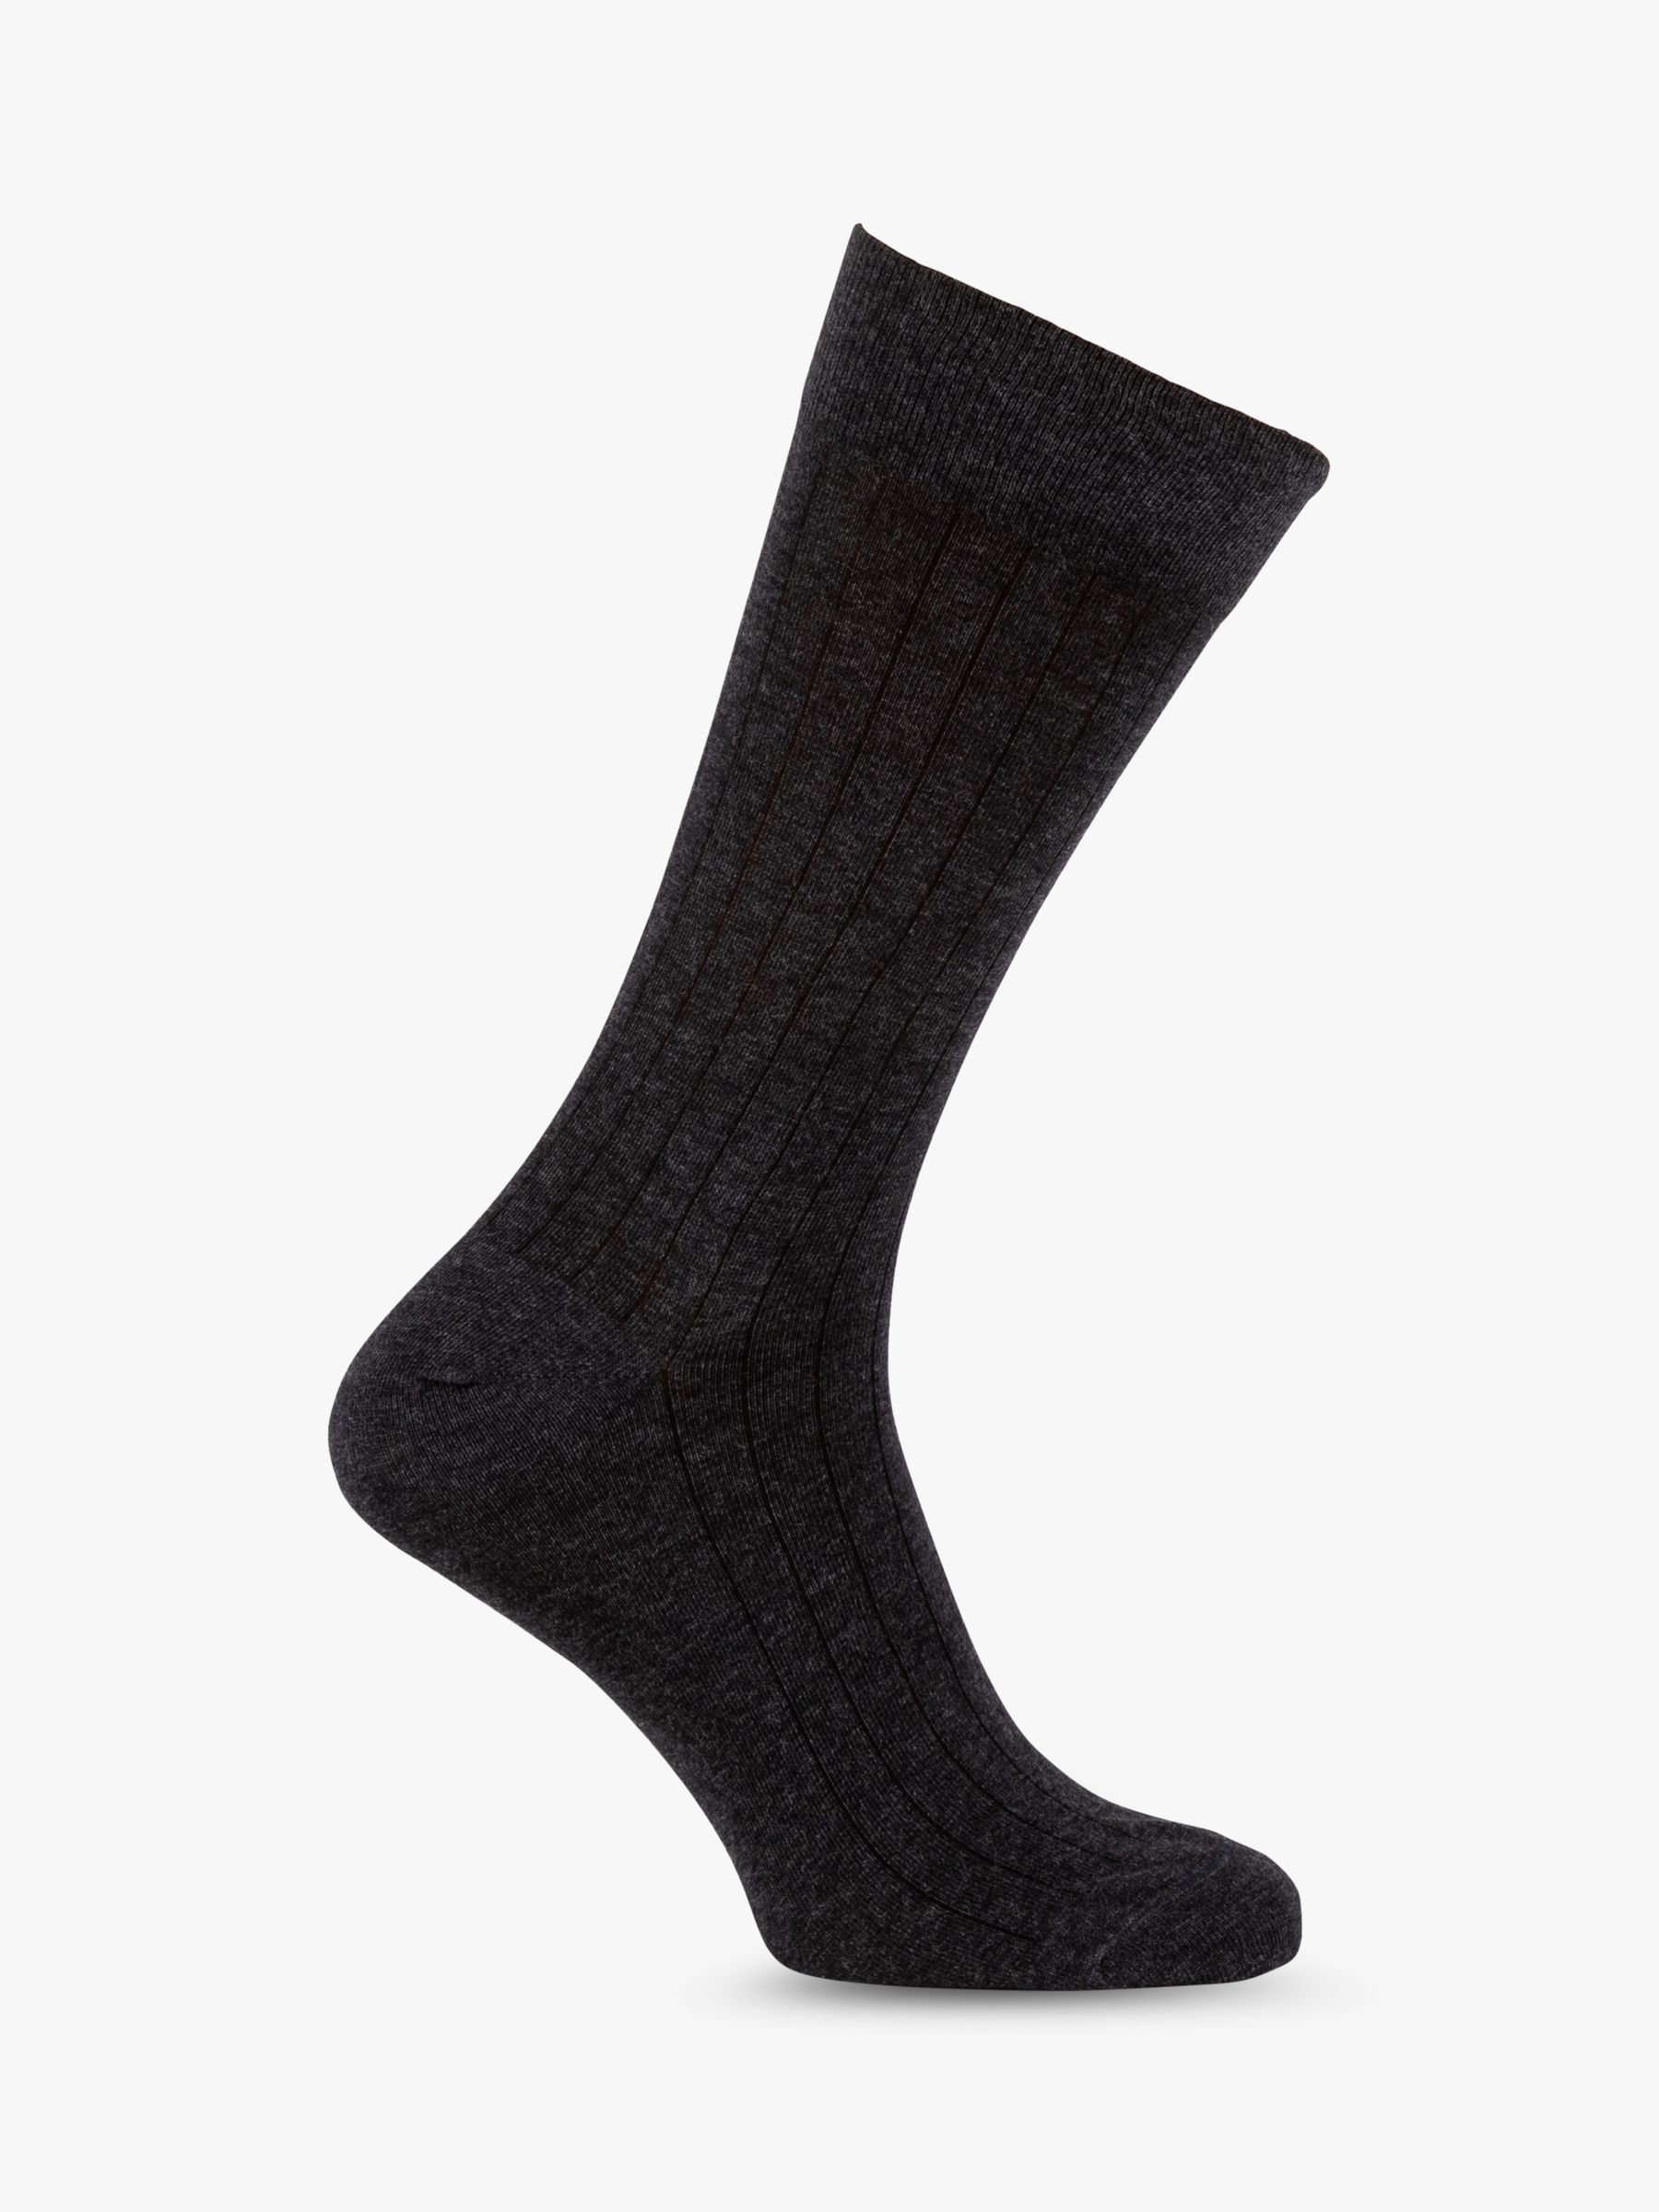 Buy totes Italian Cotton Blend Ankle Socks, Pack of 3 Online at johnlewis.com